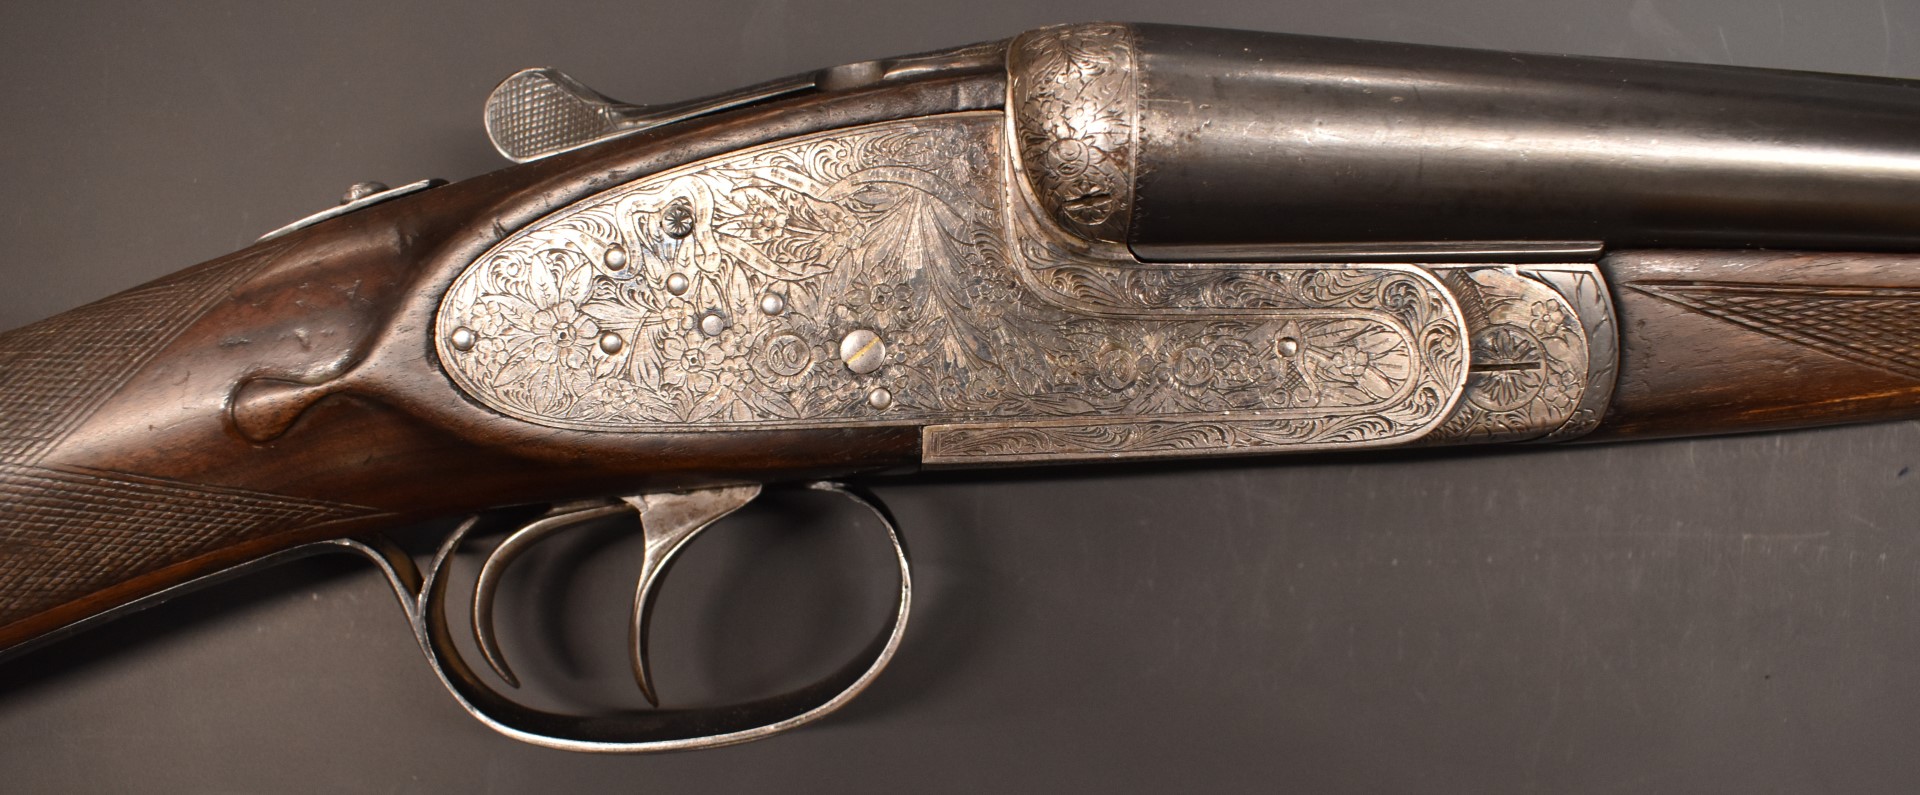 AYA XXV sidelock side by side ejector shotgun with hand detachable locks, all over floral and - Image 3 of 11